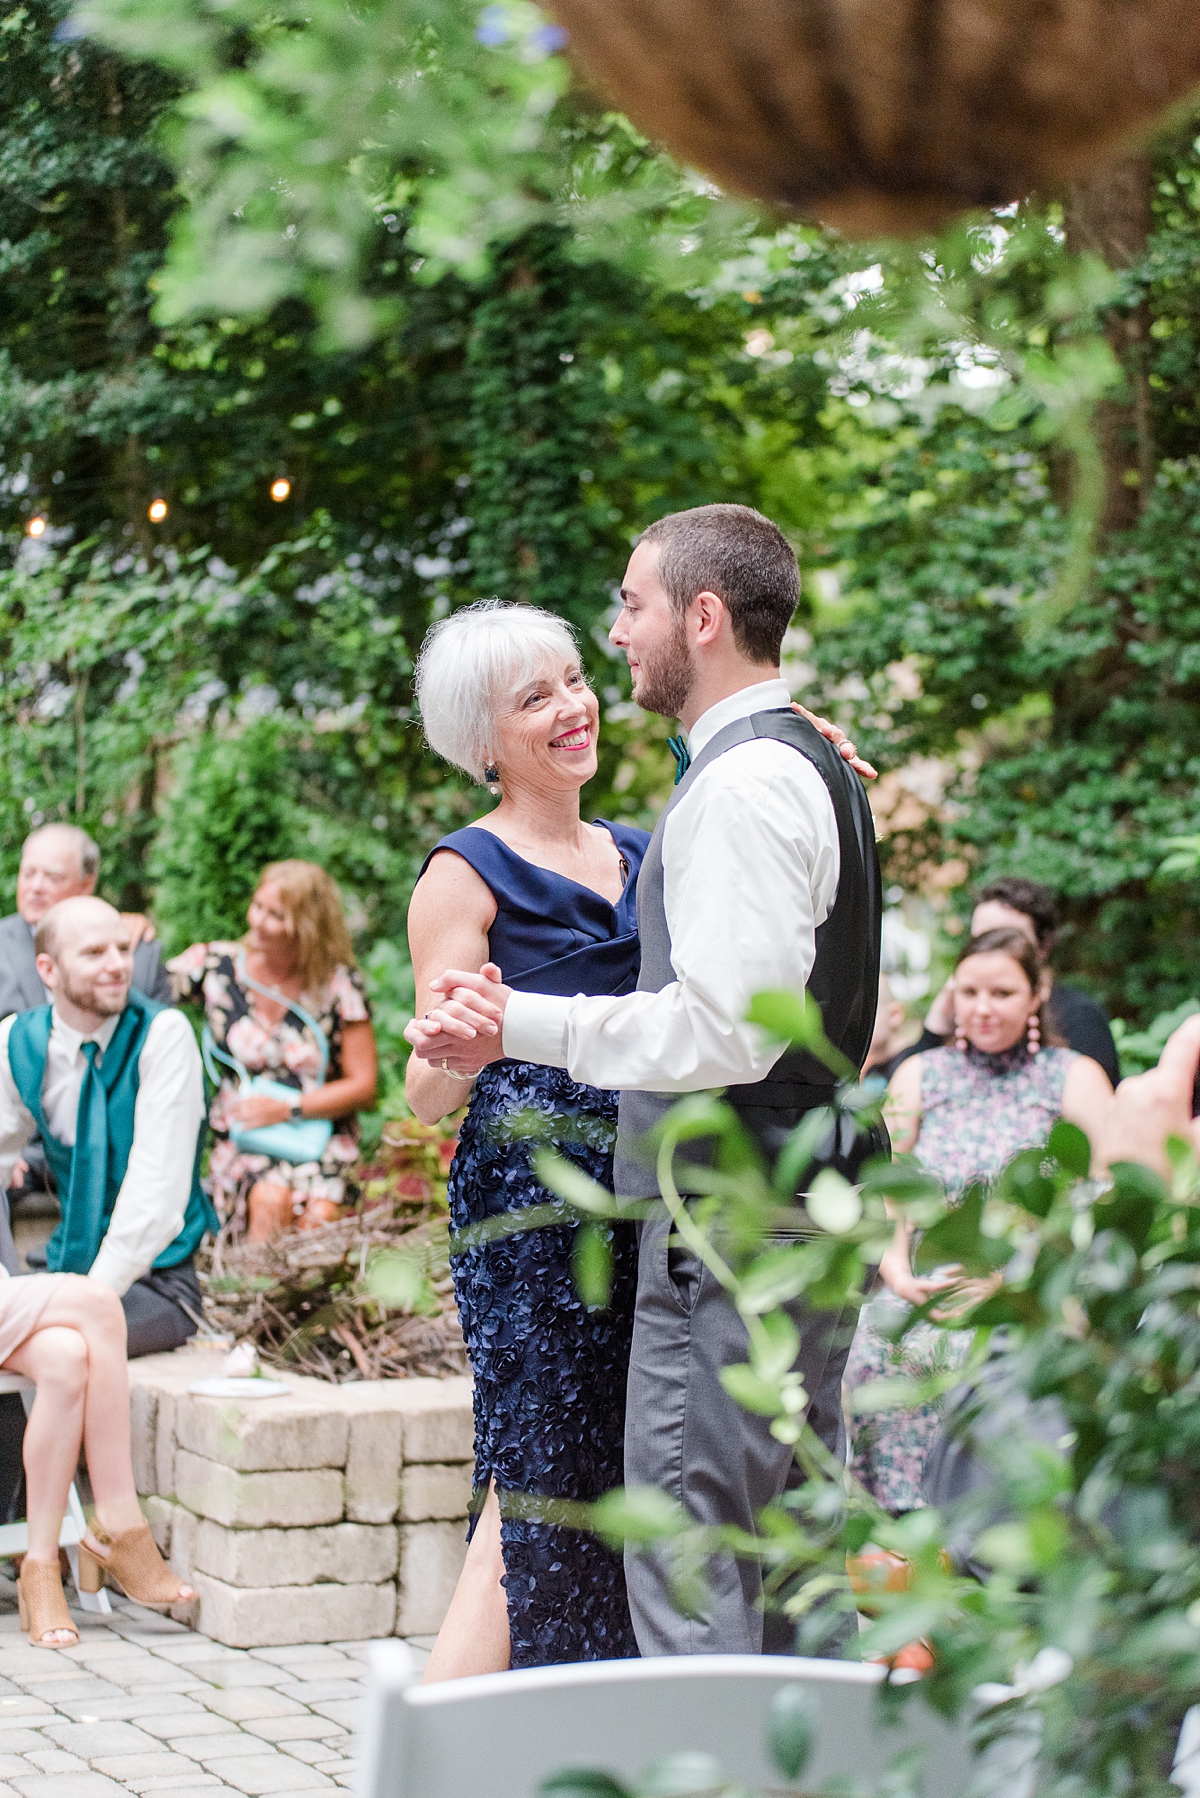 Mother Son Dance at Yorktown Backyard Intimate Wedding Reception. Wedding Photography by Richmond Wedding Photographer Kailey Brianne Photography. 